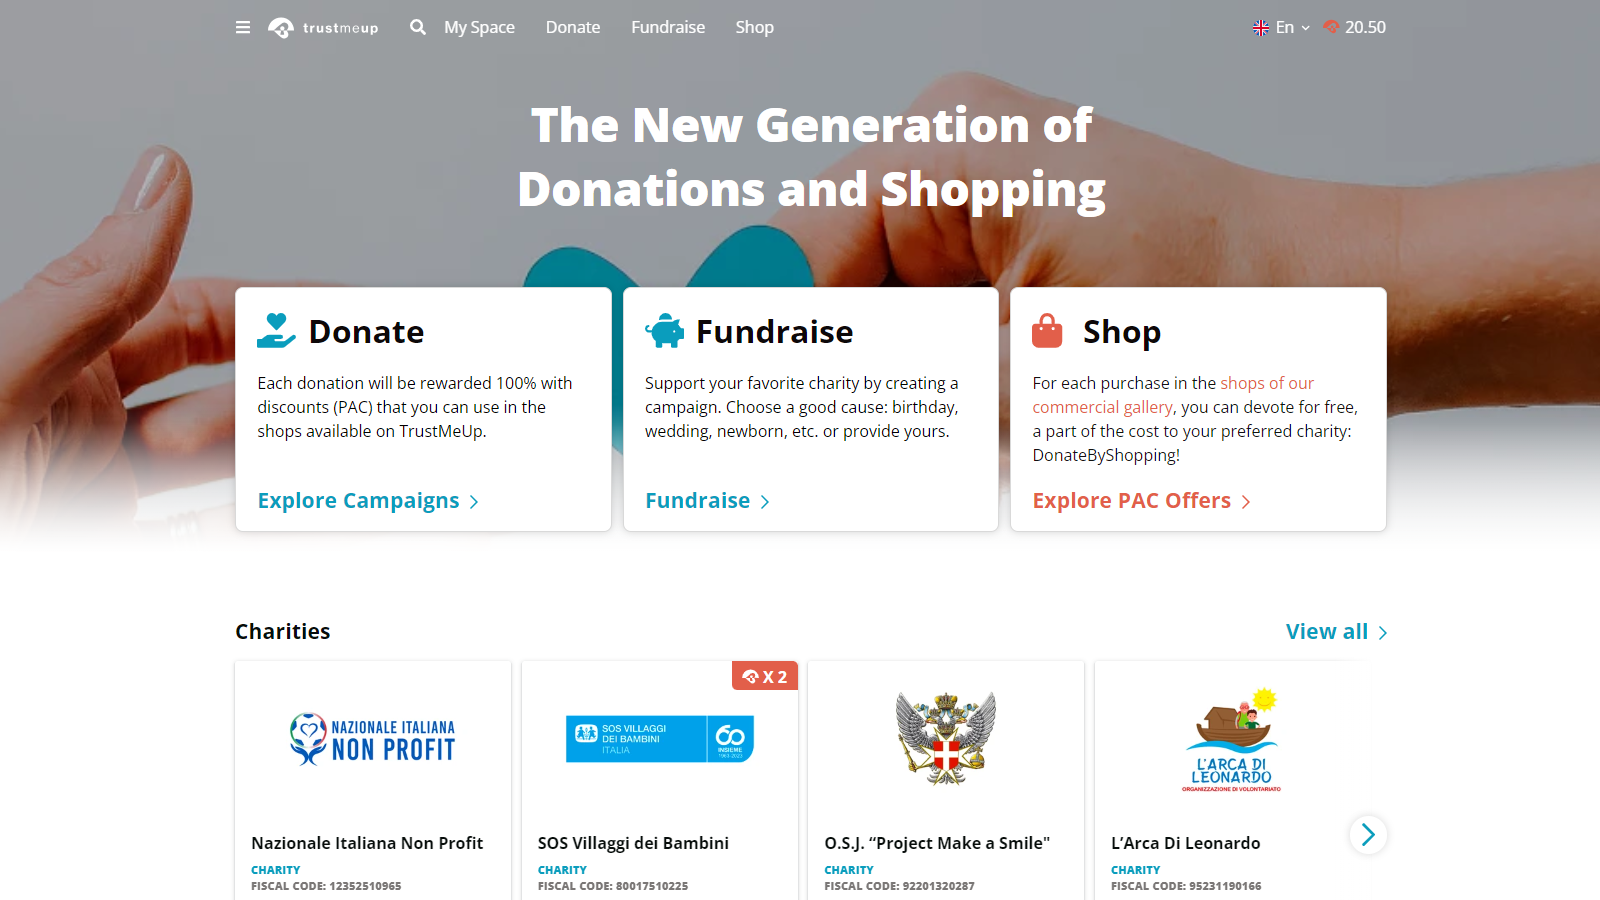 Join the New Generation of Donations and Sales